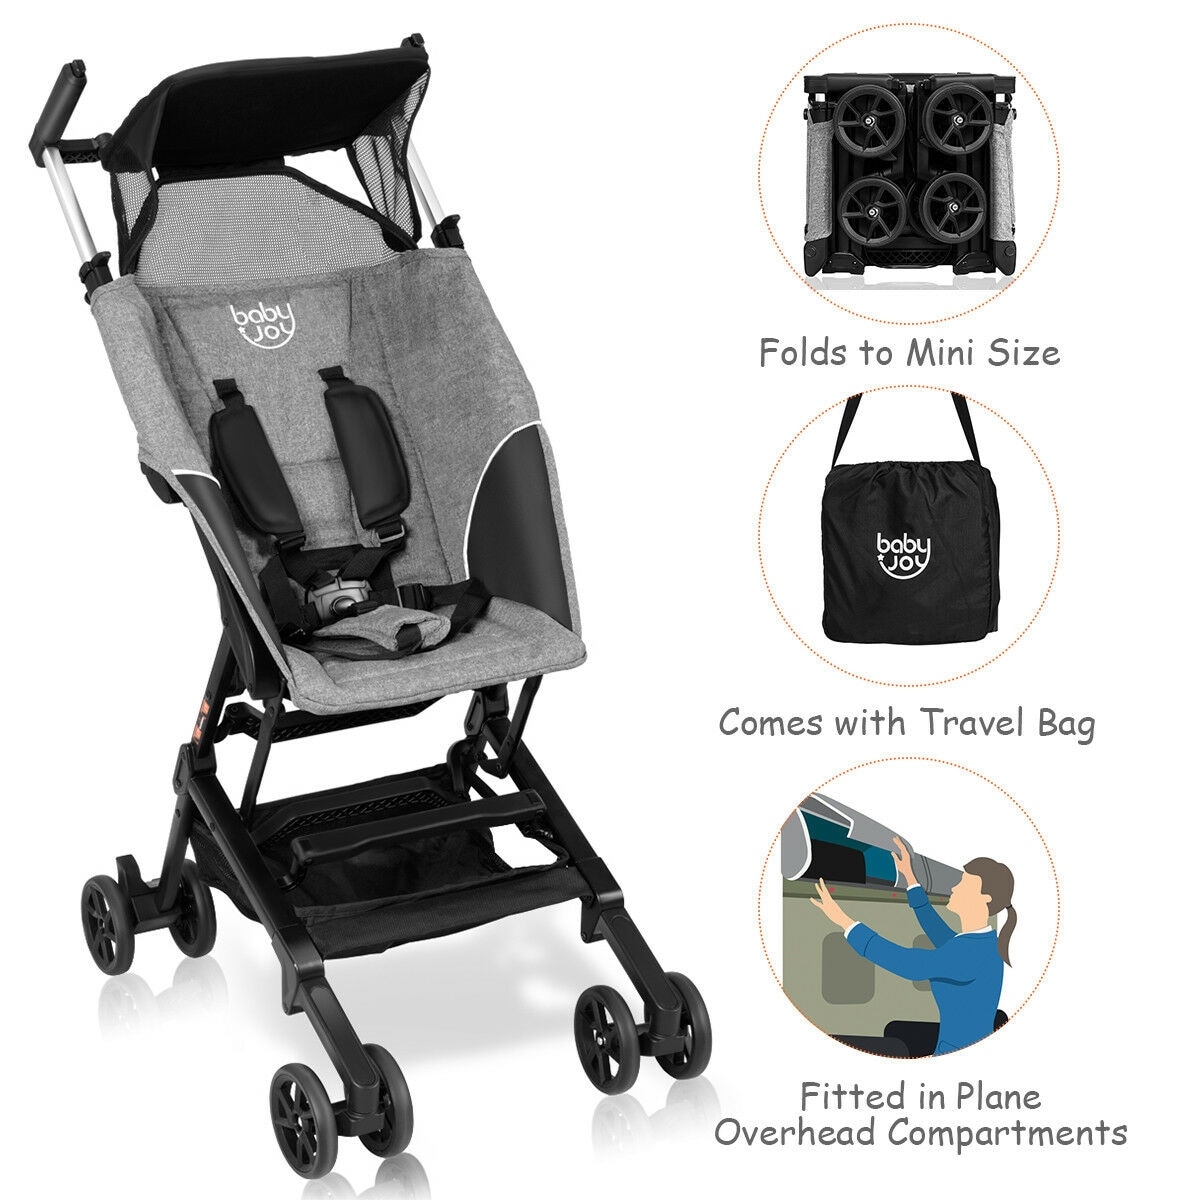 pushchair that folds into a bag